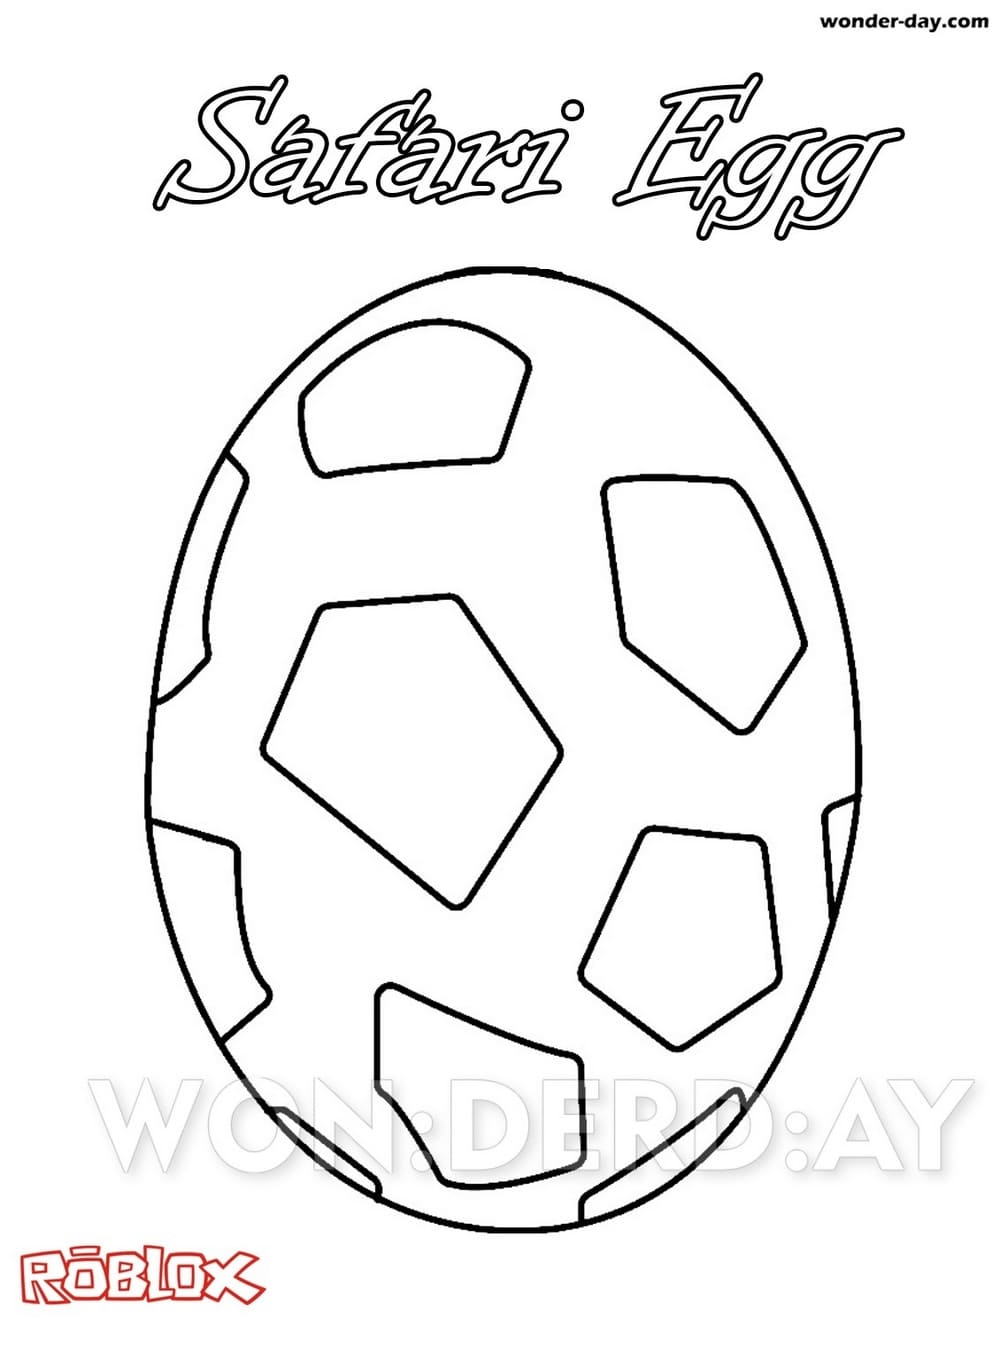 Adopt Me Coloring Pages Wonder Day Com - line egg roblox